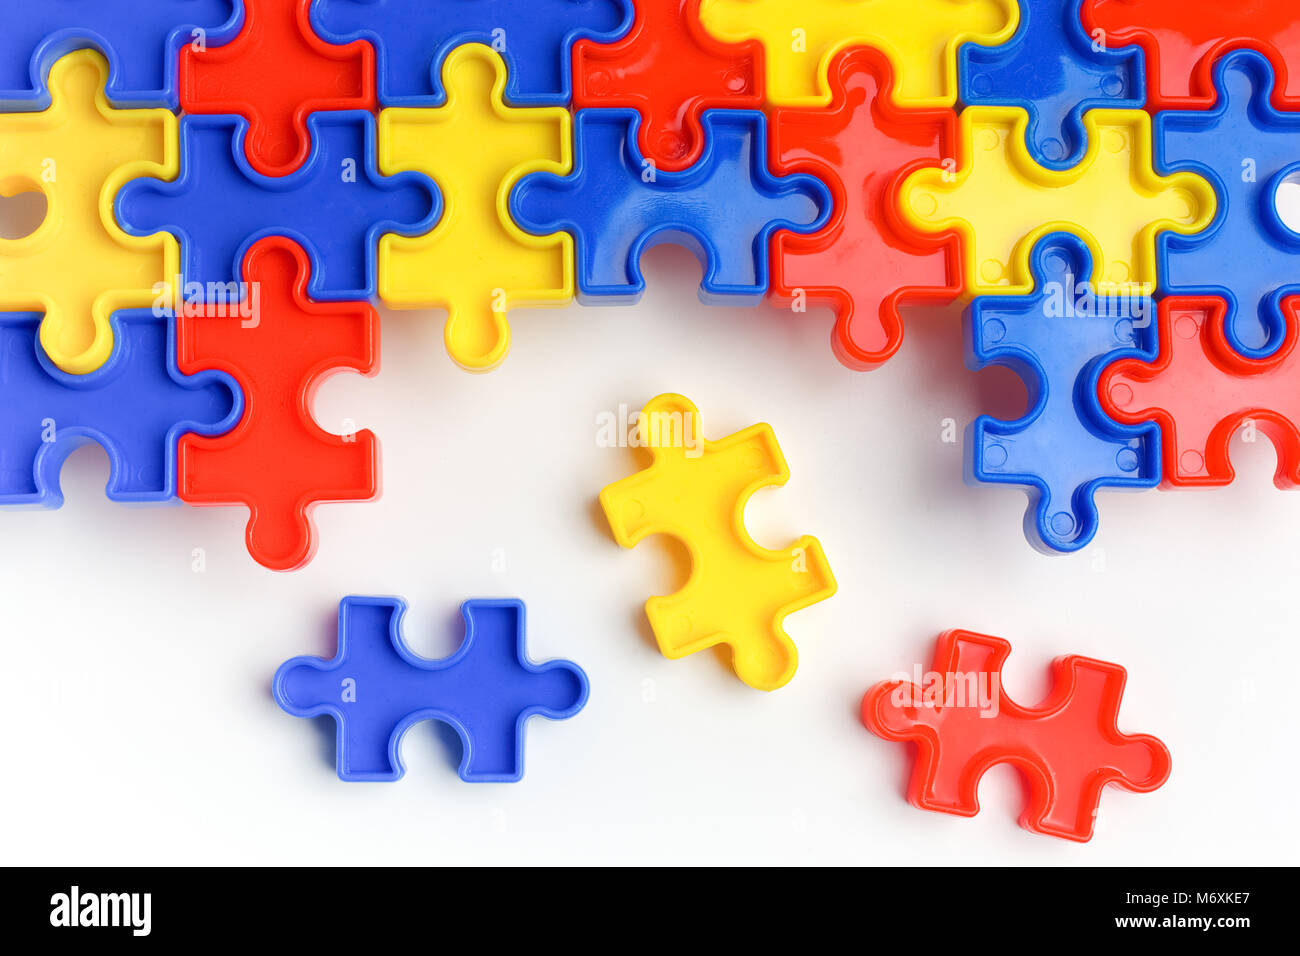 Pieces from a colorful jigsaw puzzle arranged to form a page on white background. Break barriers together for autism. Stock Photo